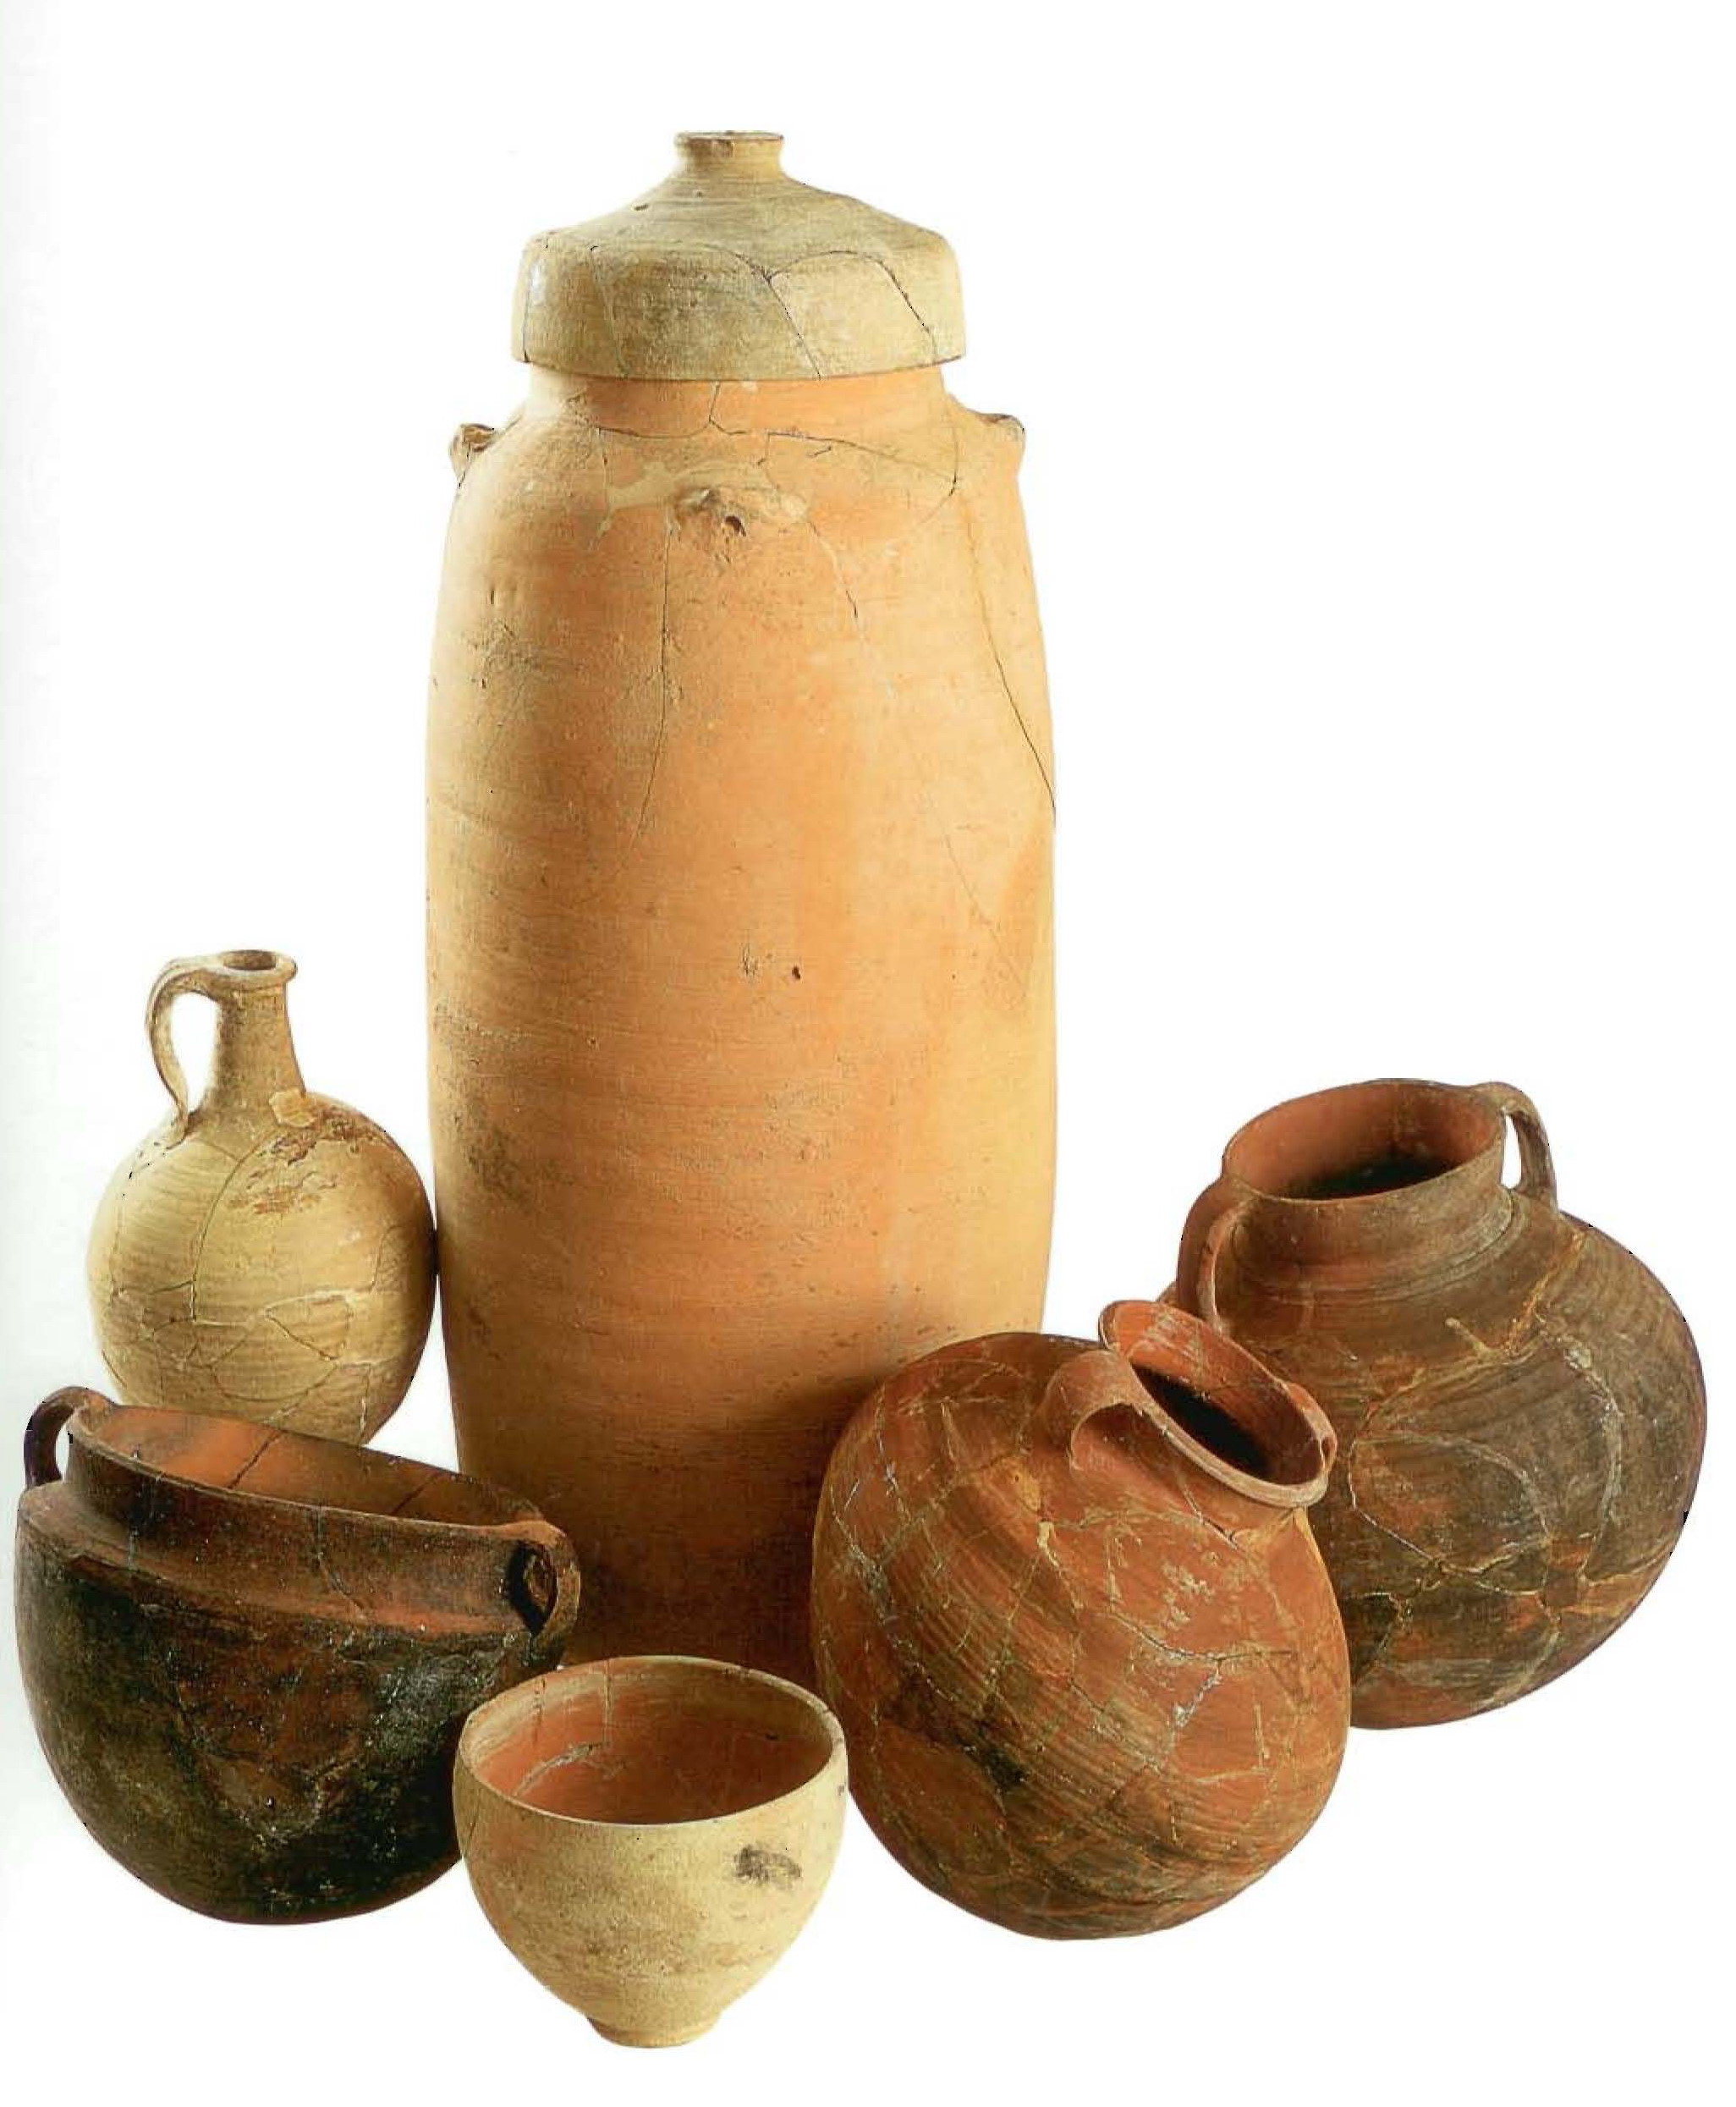 Pottery from Qumran